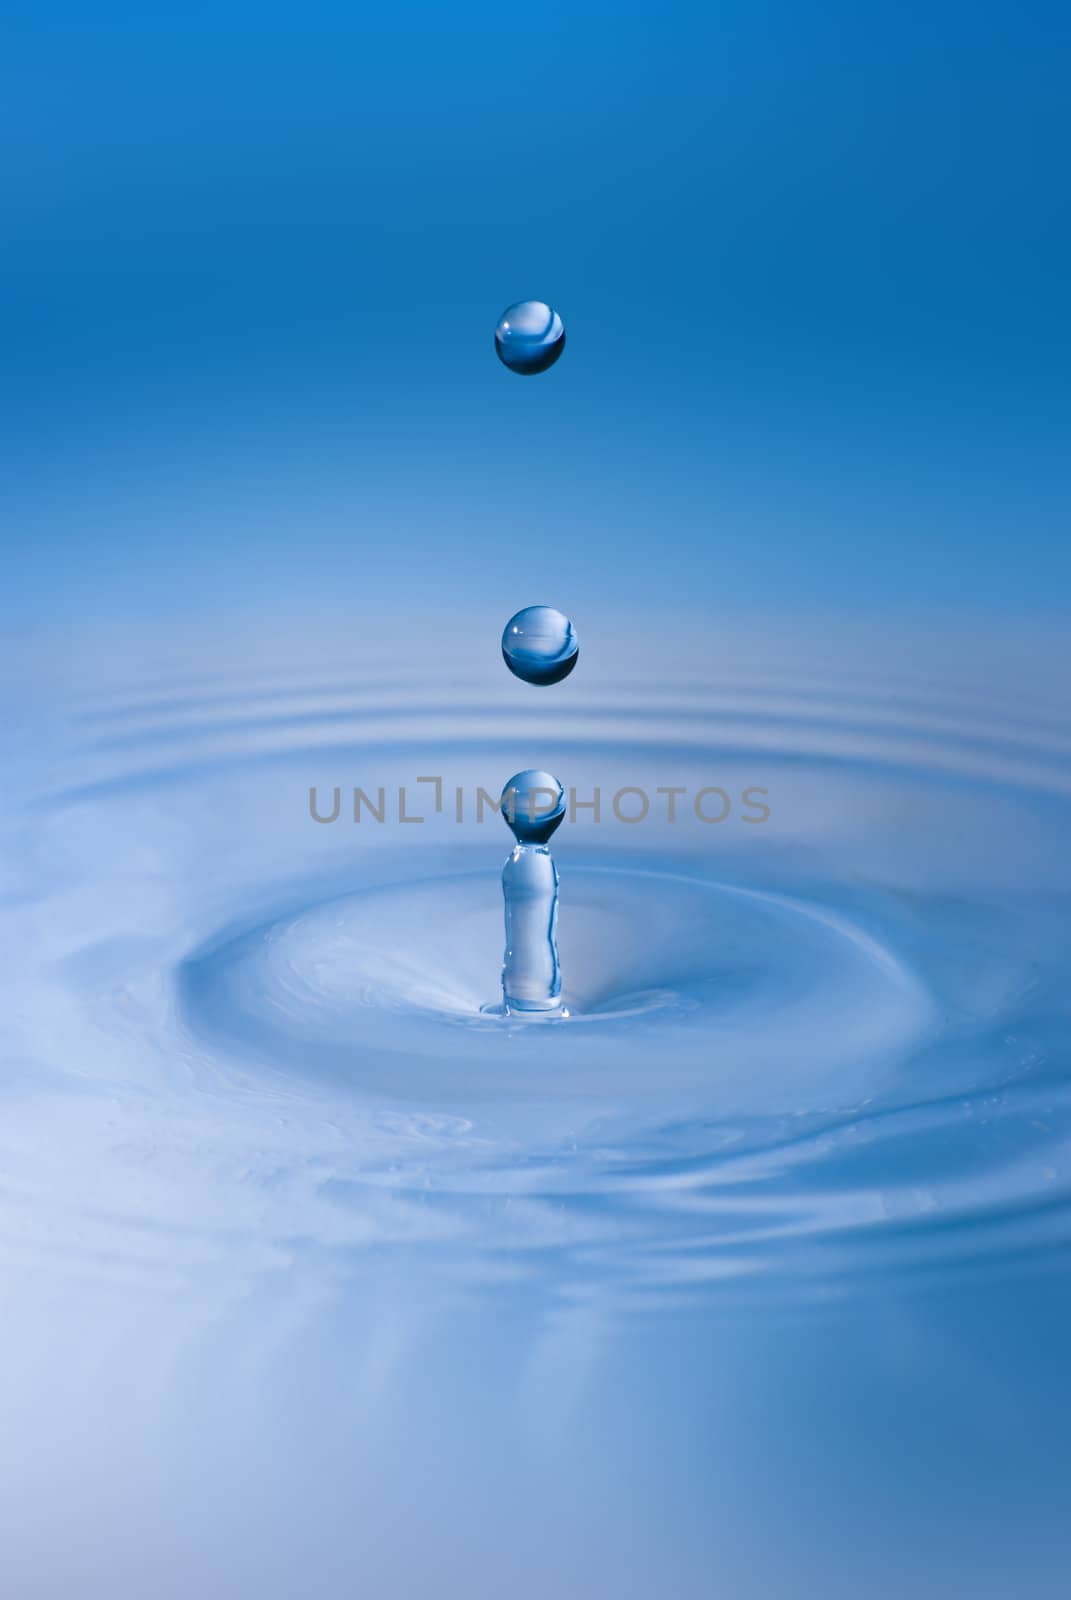 Clean blue drop of water splashing in clear water. Abstract blue environmental background.